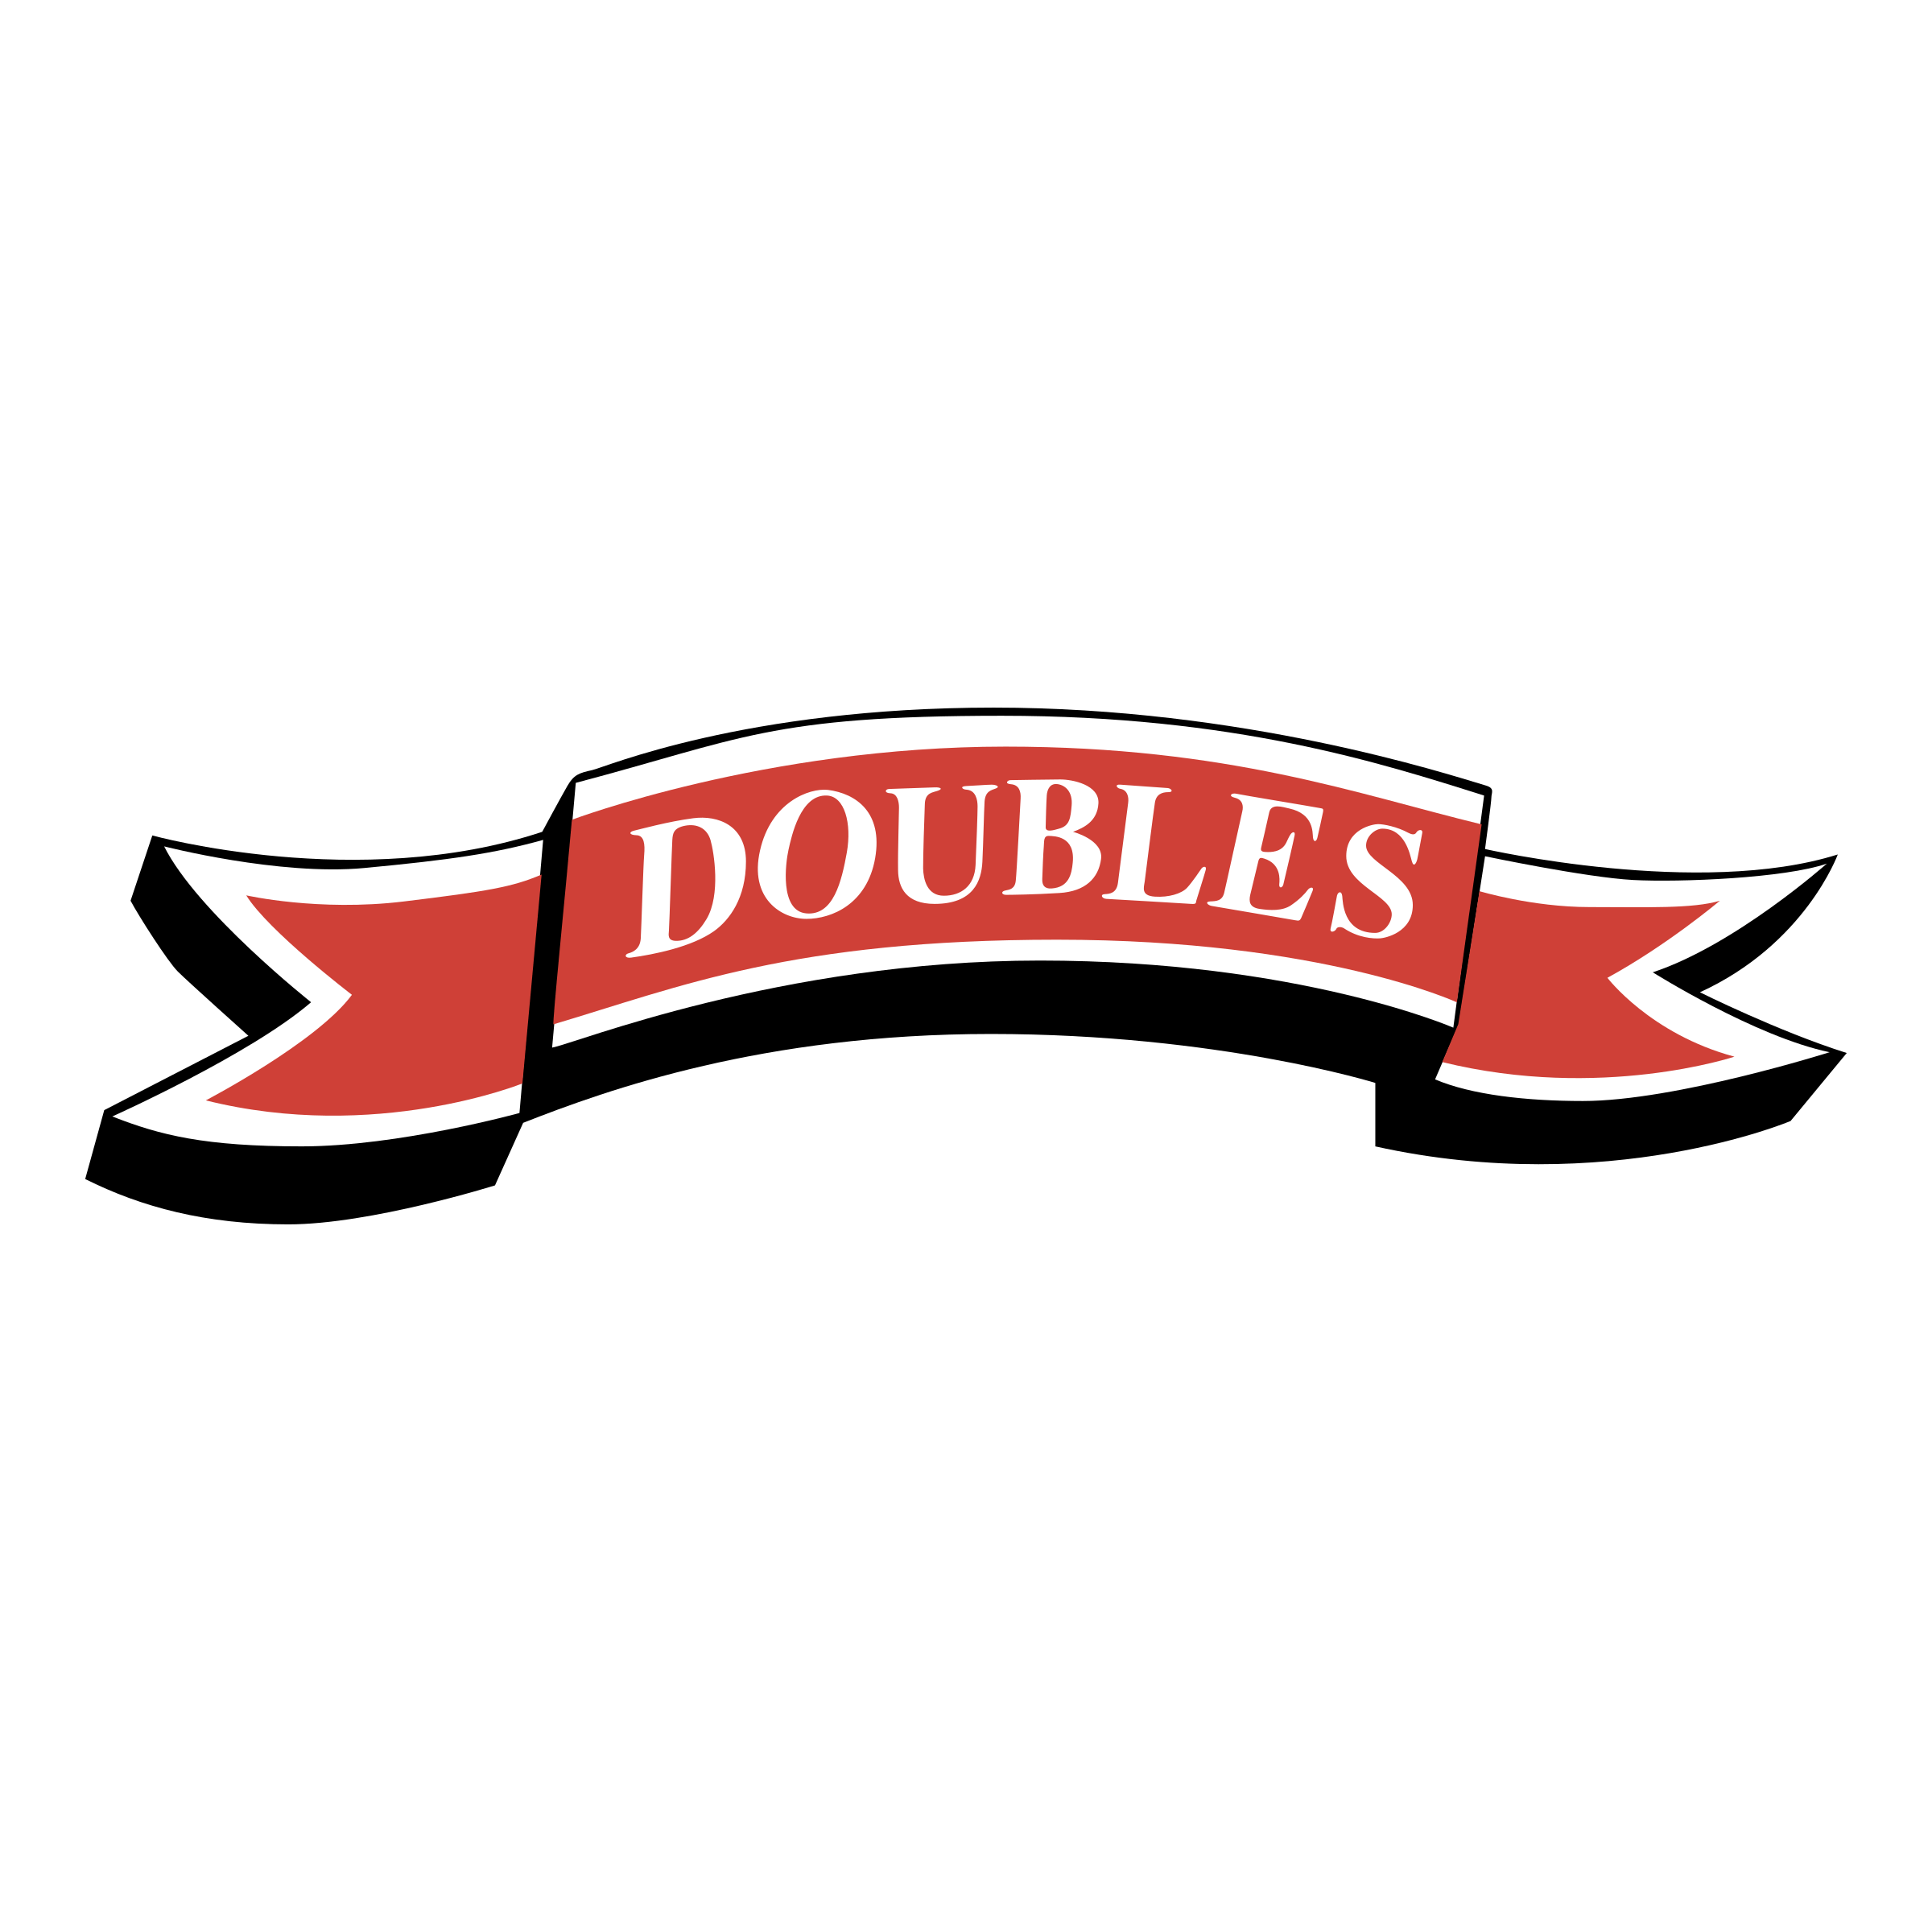 Double S Logo - Doubles Logo PNG Transparent & SVG Vector - Freebie Supply